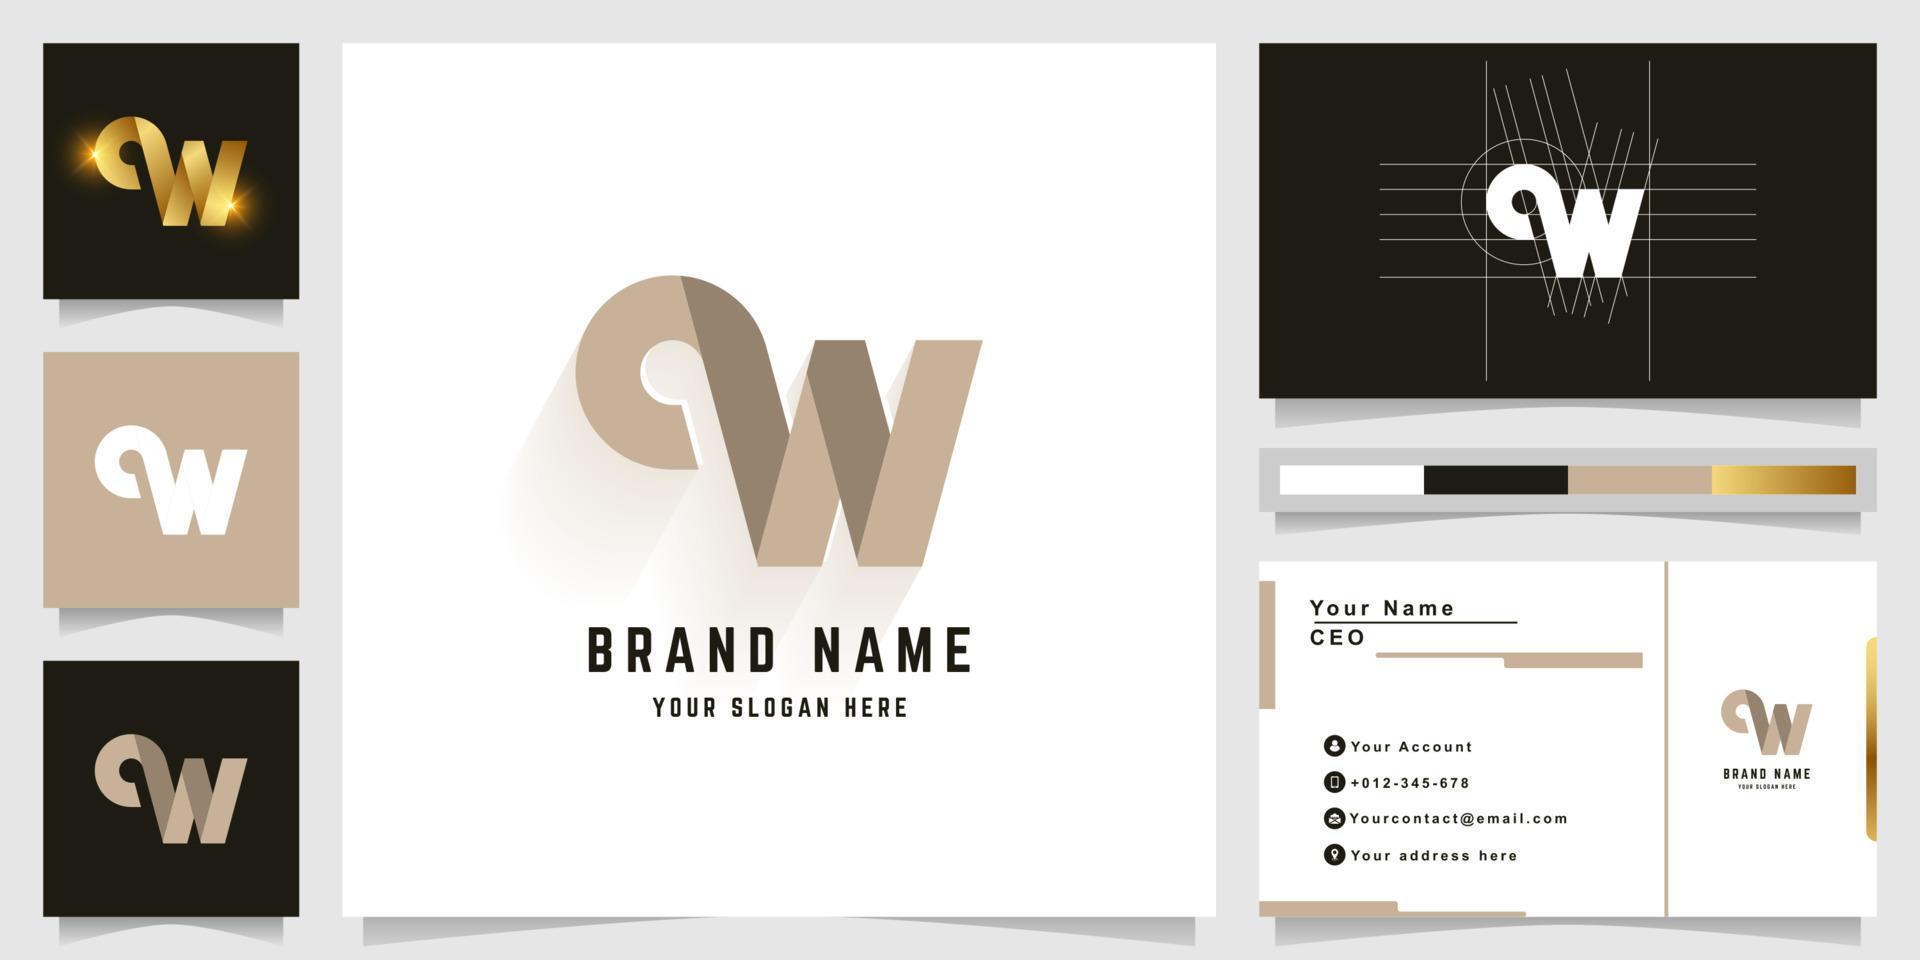 Letter QW or ON monogram logo with business card design vector